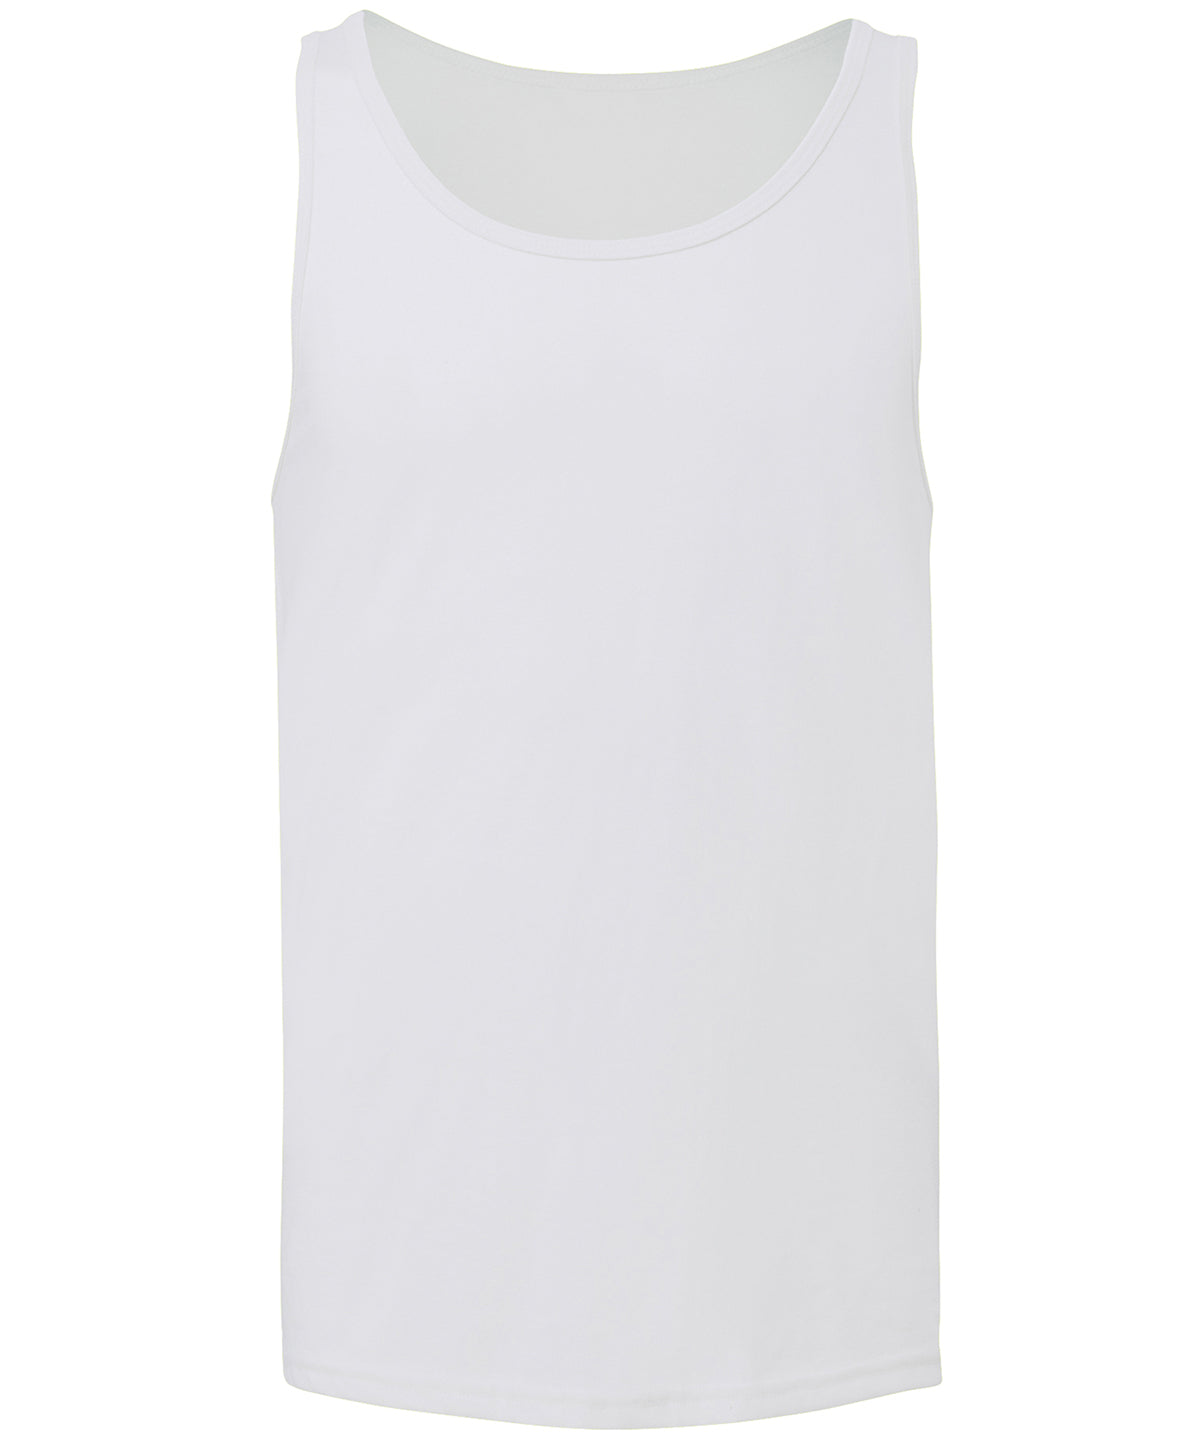 Personalised Vests - Mid Blue Bella Canvas Unisex Jersey tank top